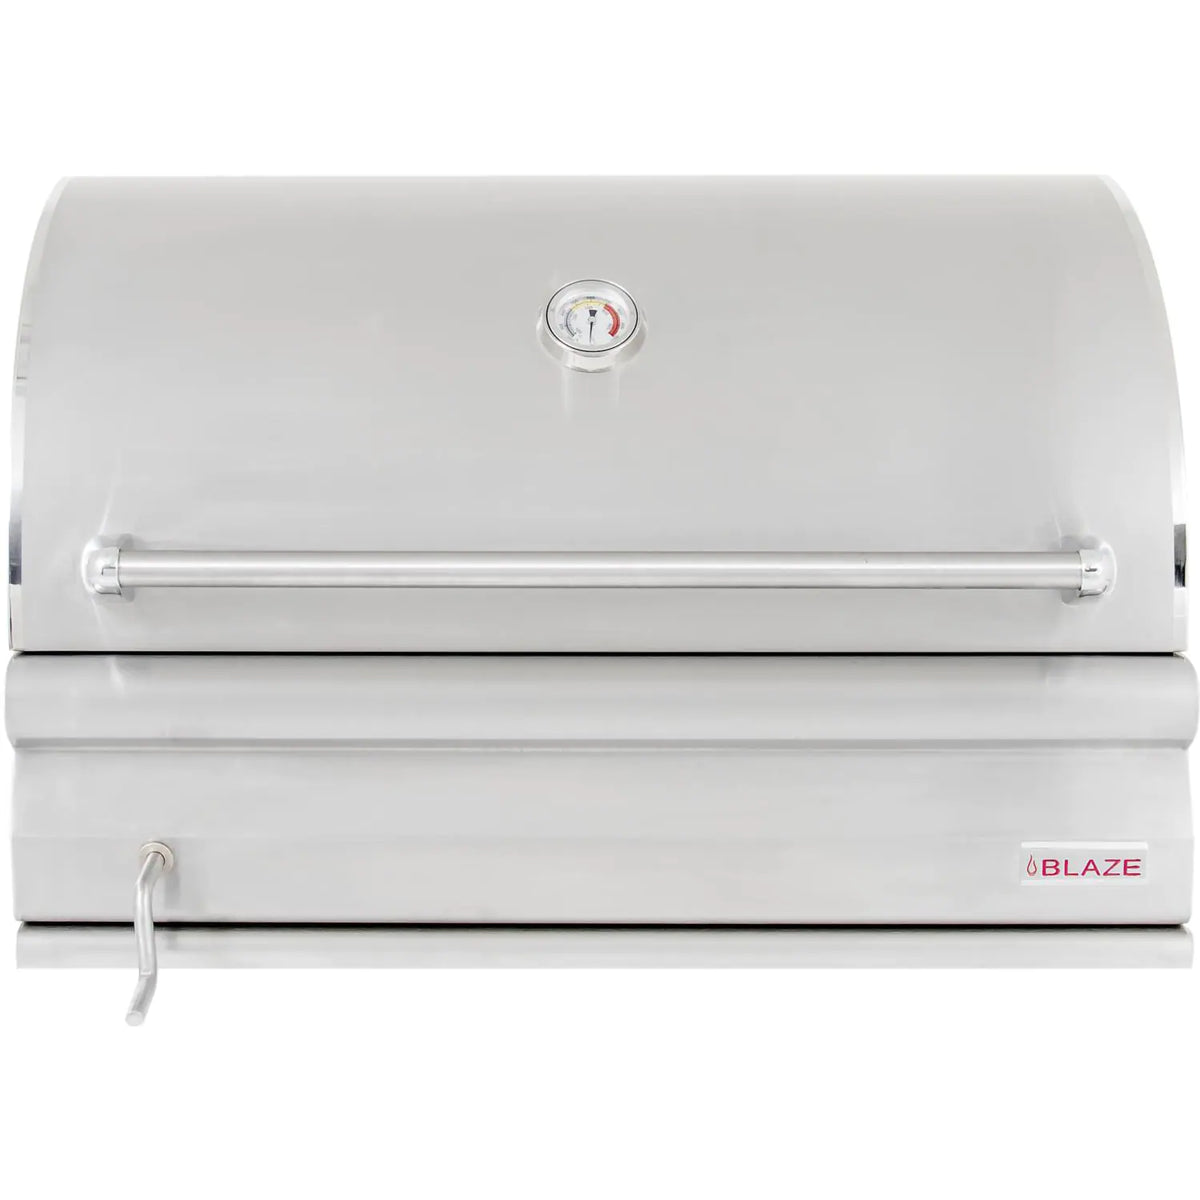 Blaze 4 Cooking Grids 32 Inch Charcoal Grill Front View